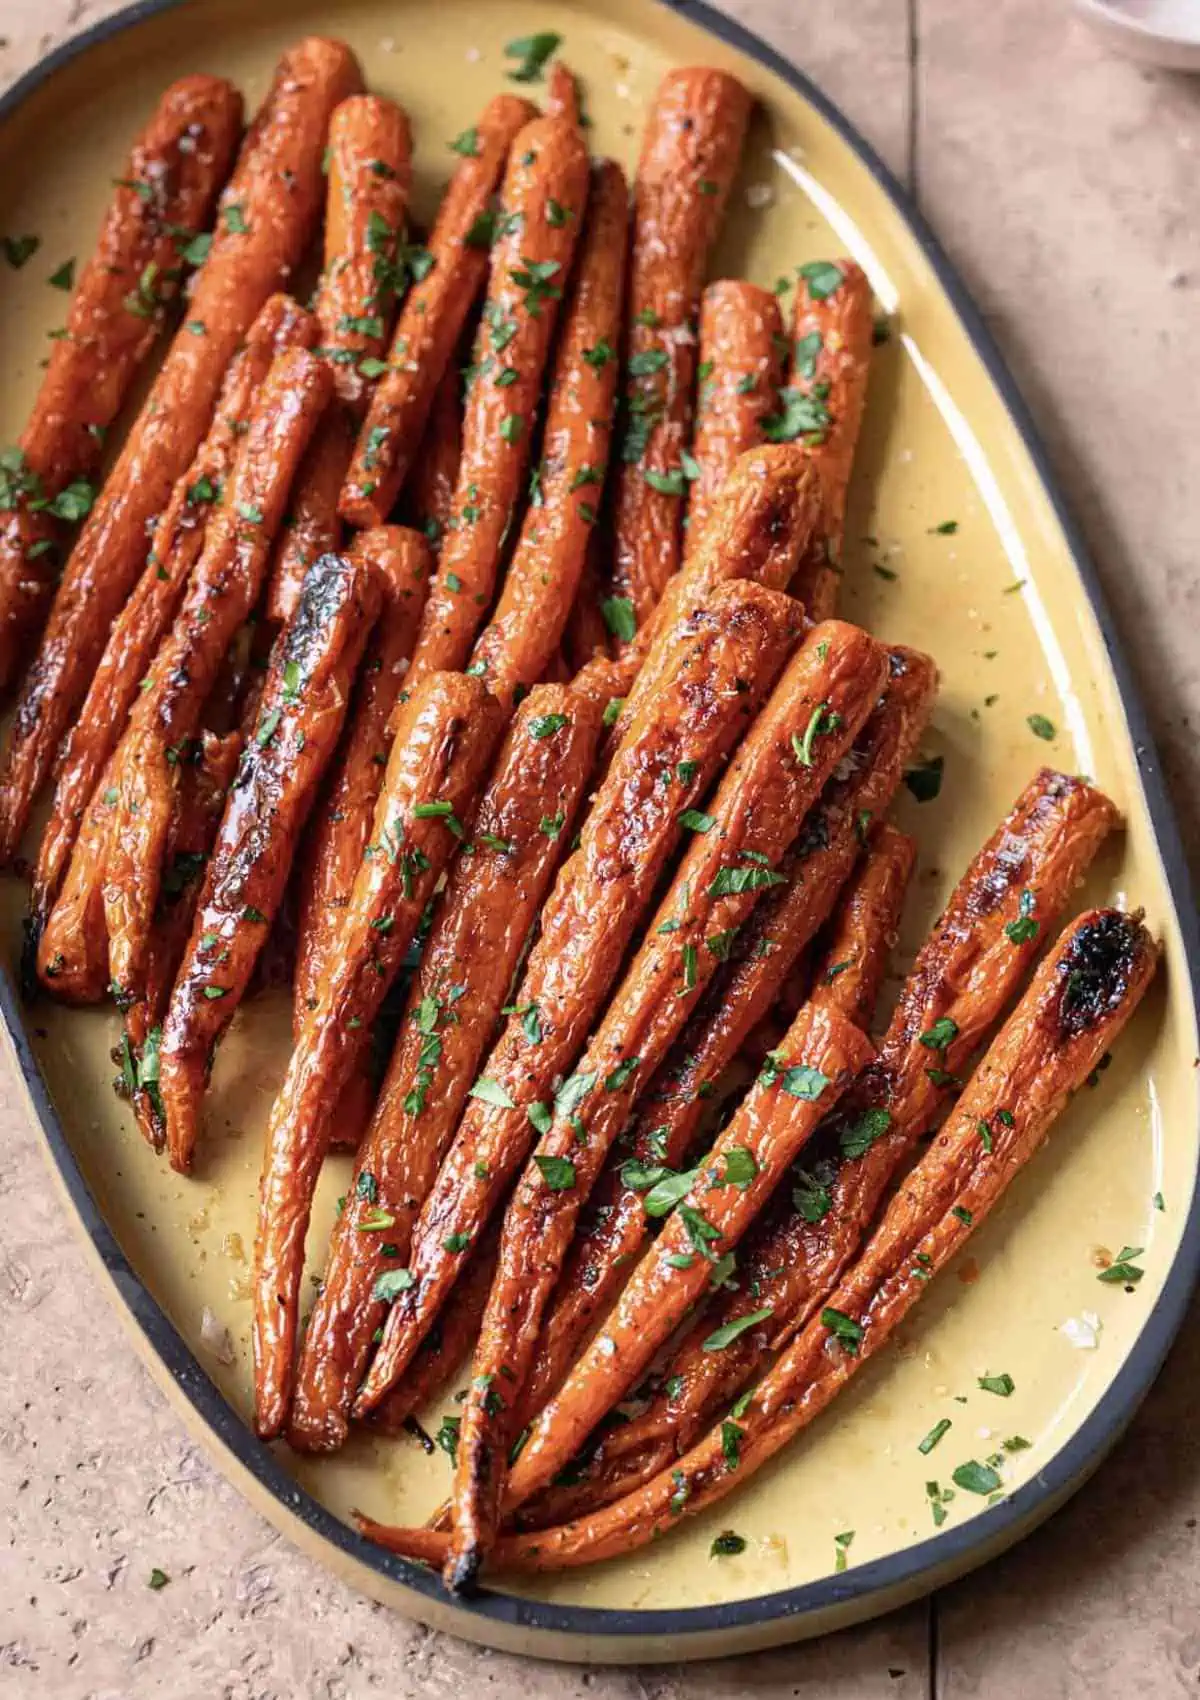 Elegant serving platted with long roasted carrots. 